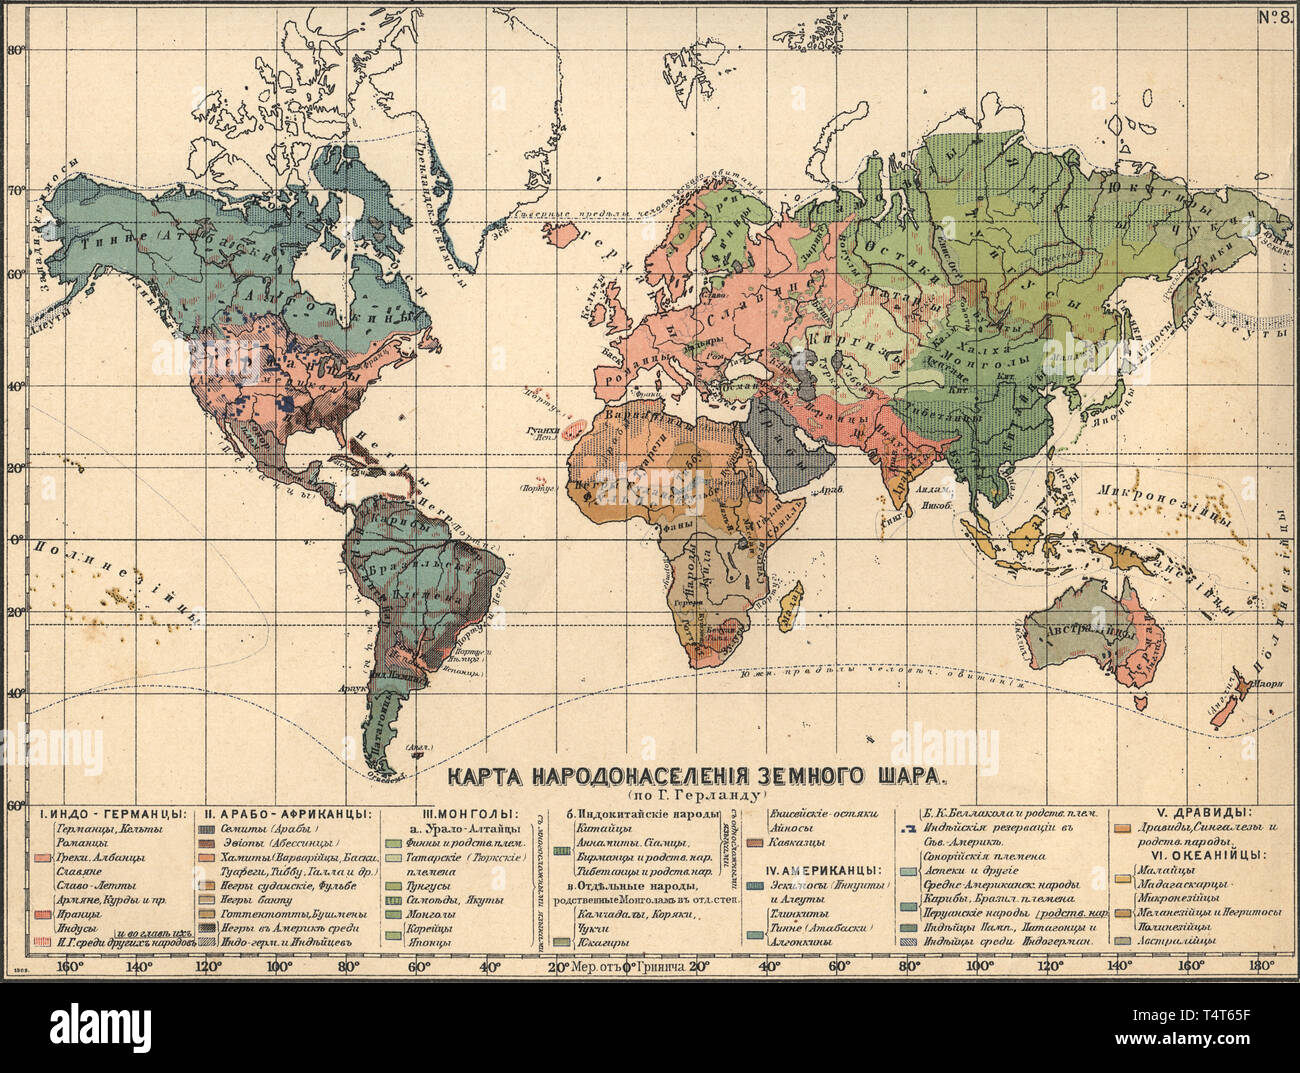 World Population Map ( according to G. Gerland ) New table atlas A.F. Marcks St. Petersburg, 1910 Stock Photo